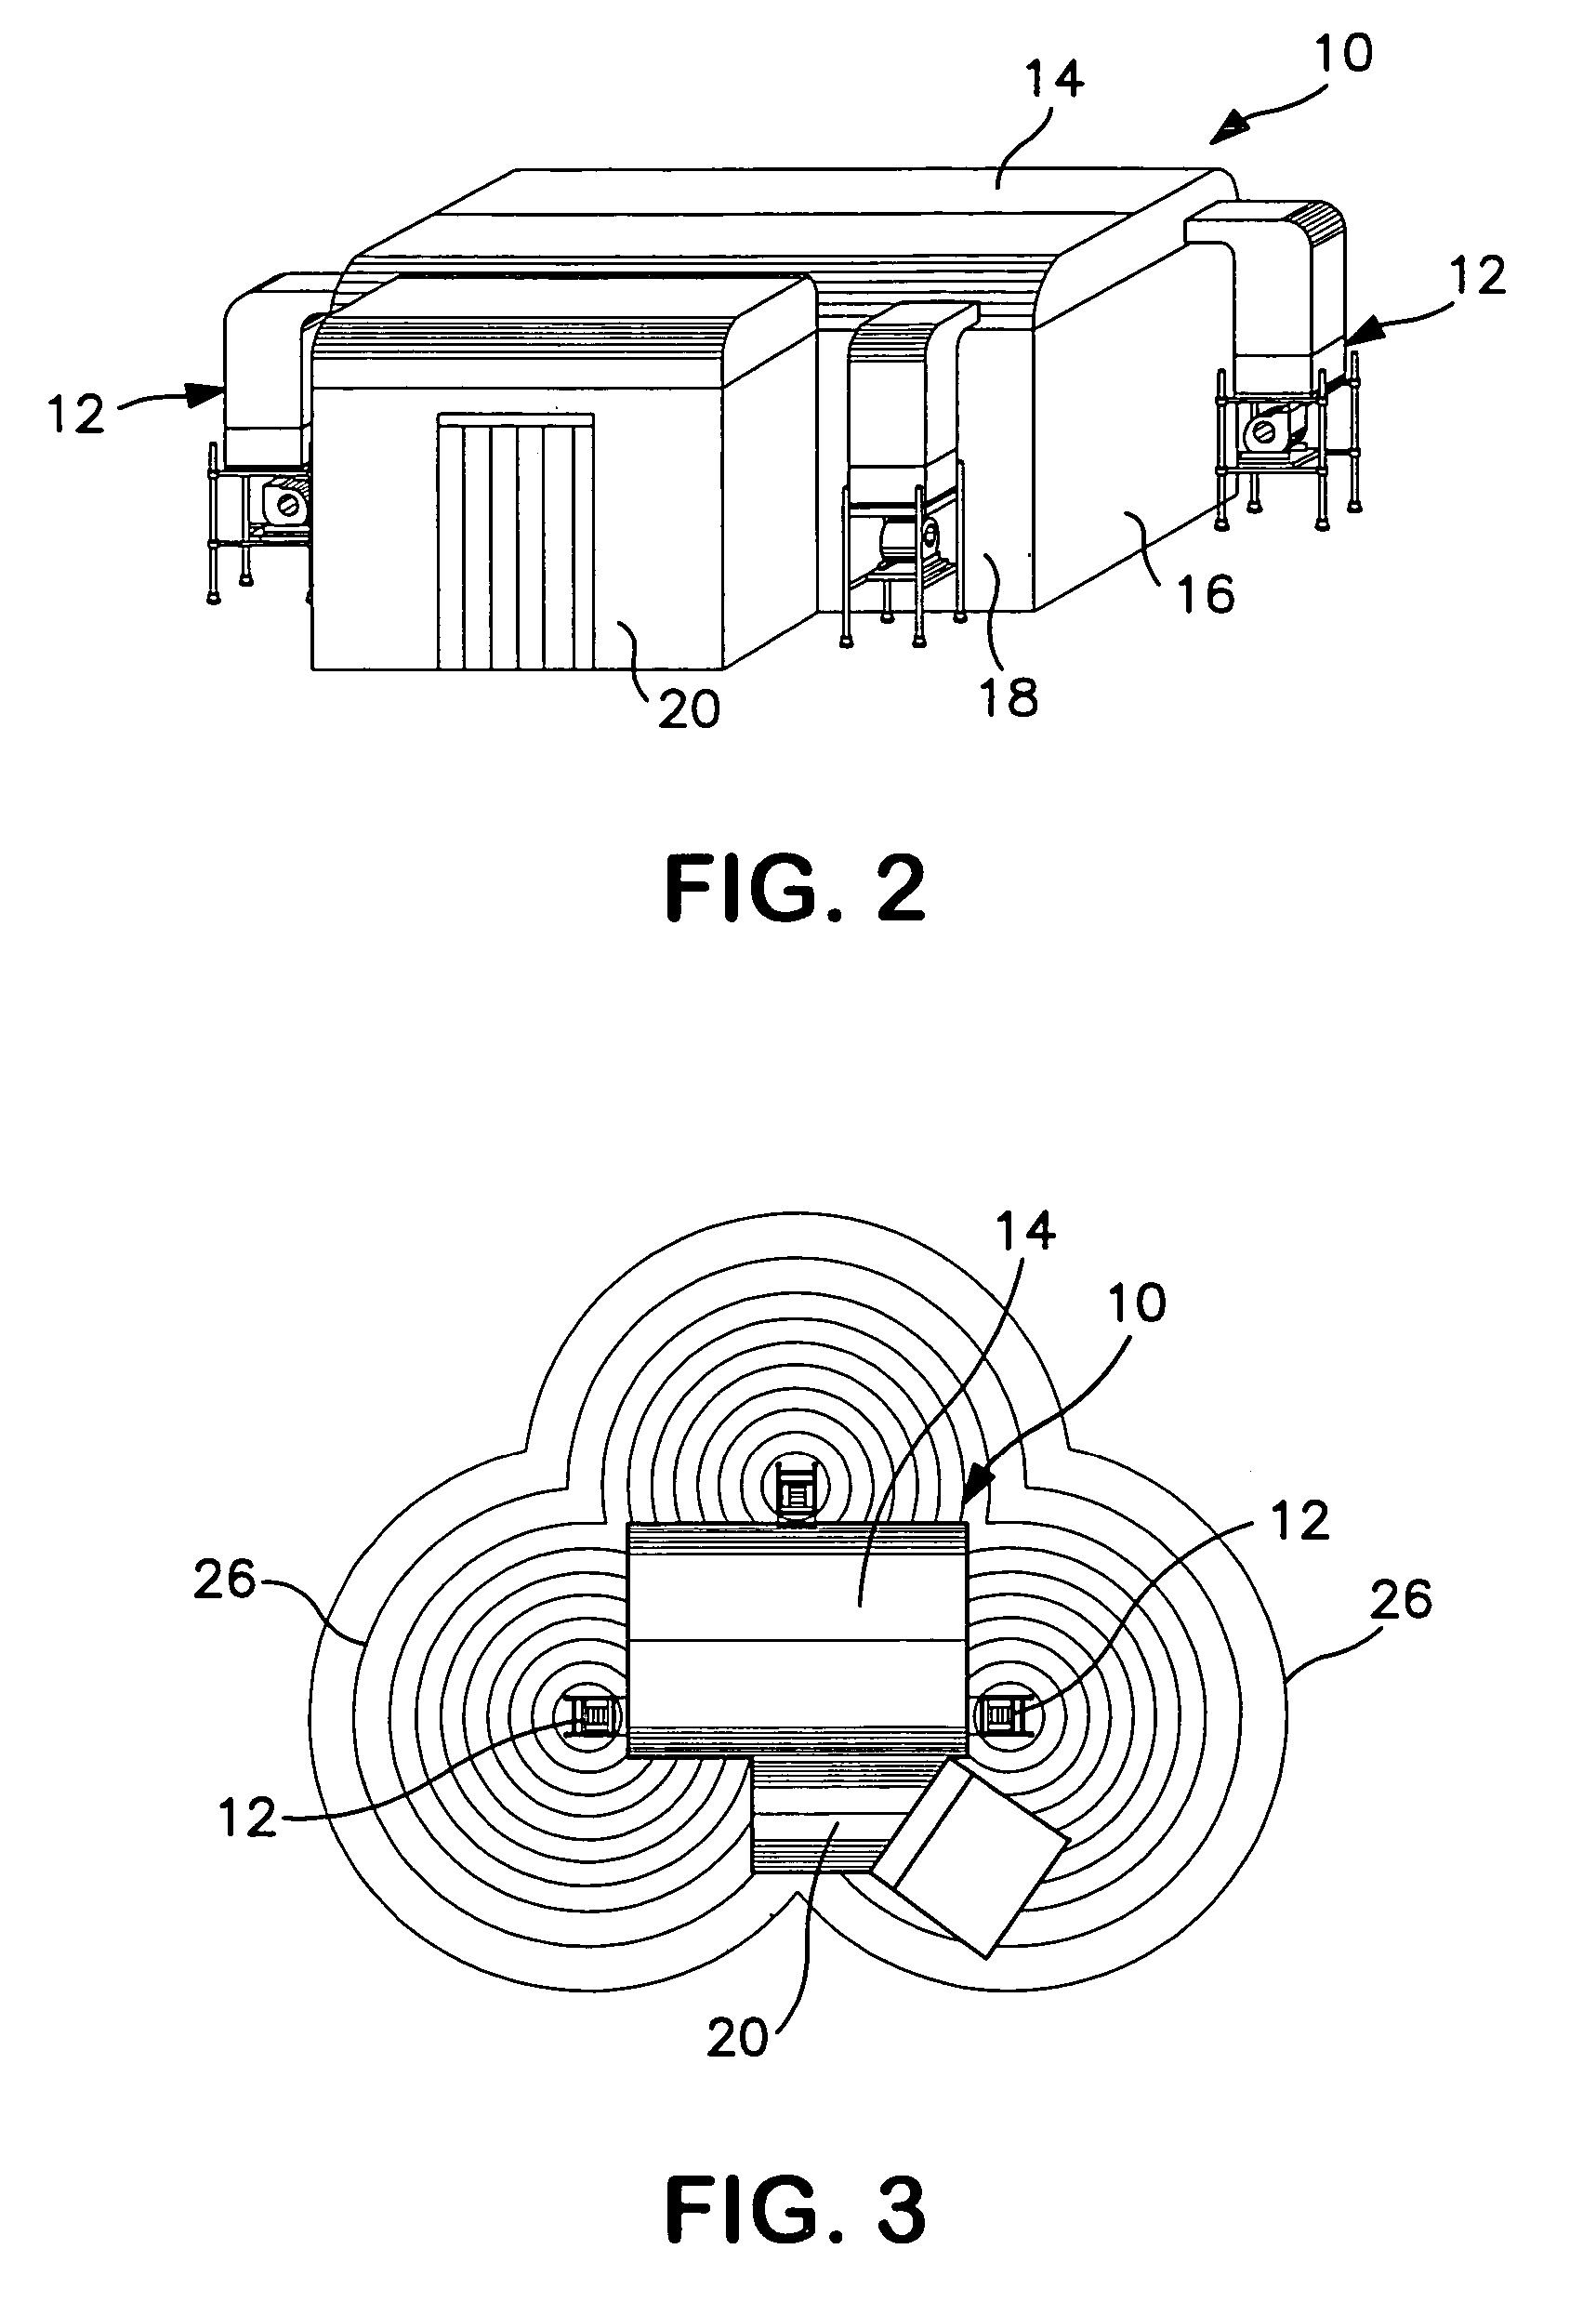 Method of minimizing cross contamination between clean air rooms in a common enclosure